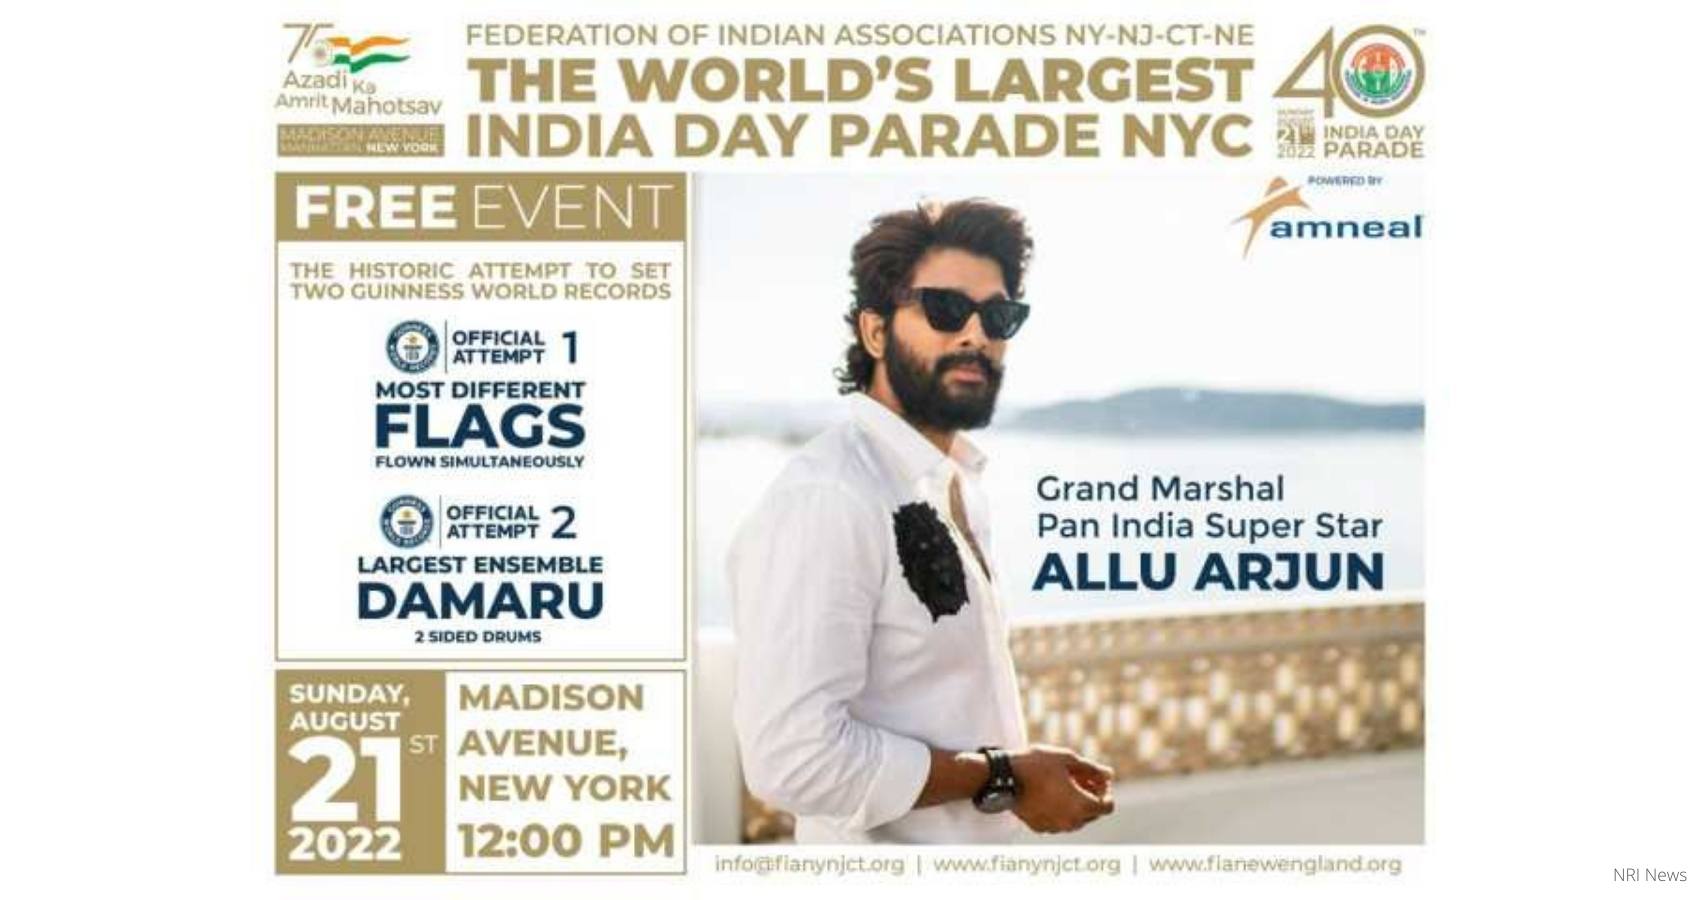 Allu Arjun To Lead India Day Parade In New York